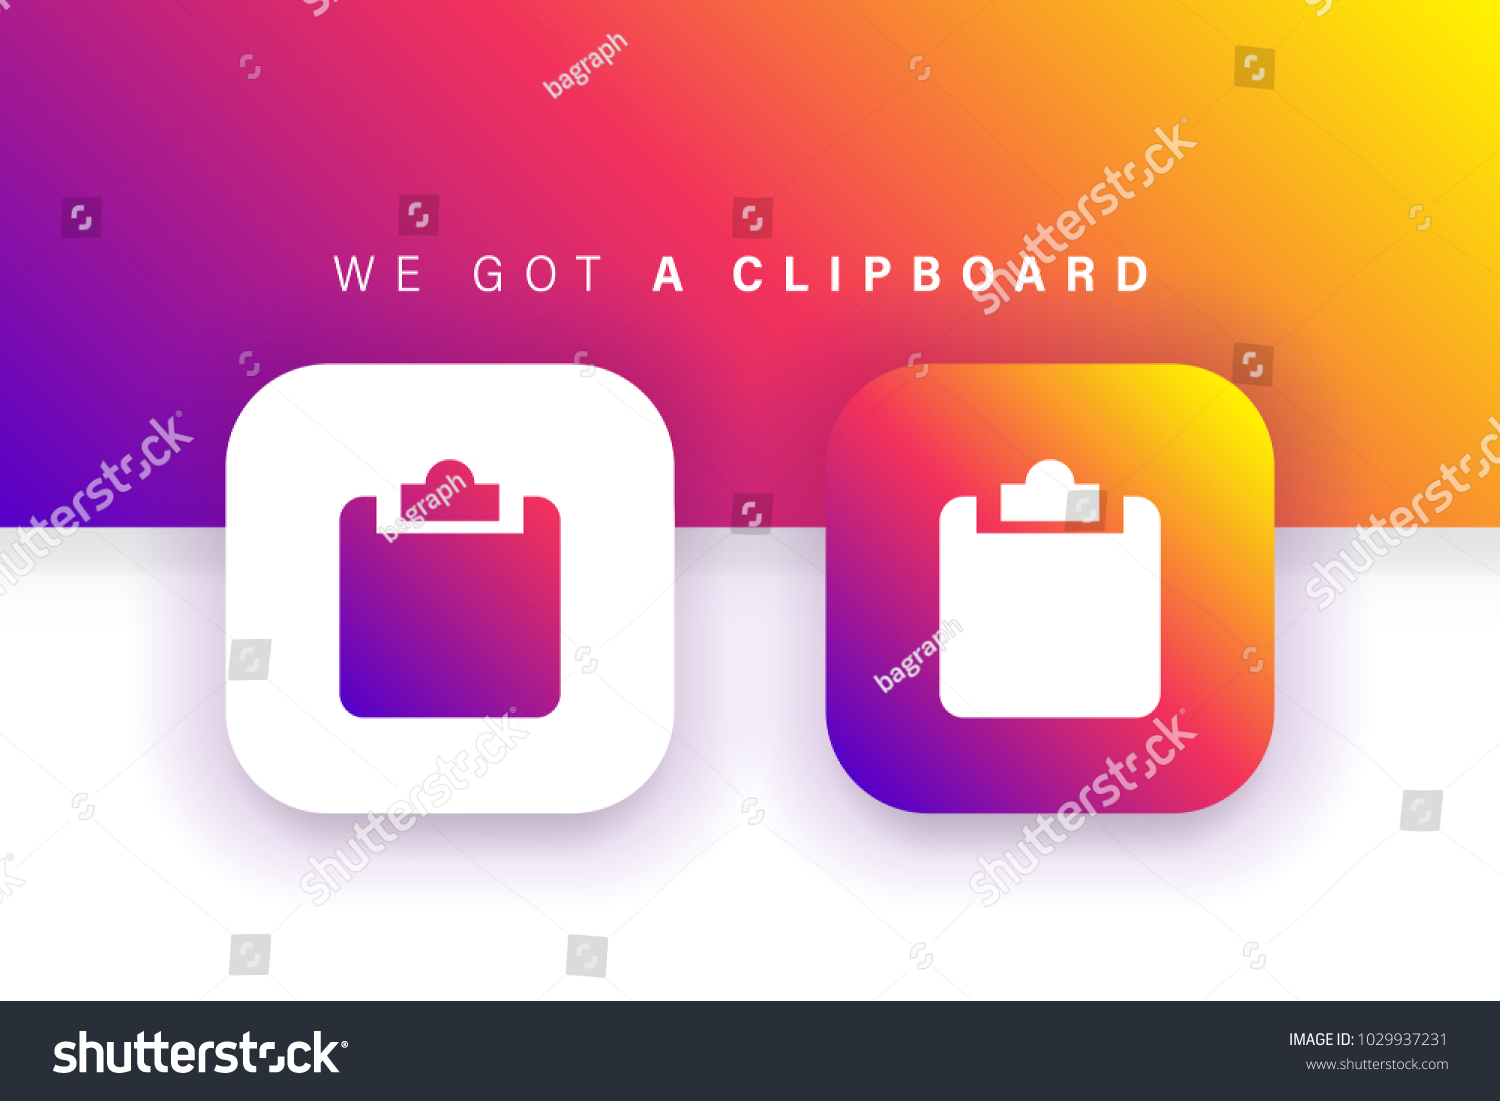 SVG of Clipboard icon. Paste icon. Checklist icon. Square contained. Use for brand logo, application, ux/ui, web. Colorful design. Compatible with jpg, png, eps, ai, cdr, svg, pdf, ico, gif. svg